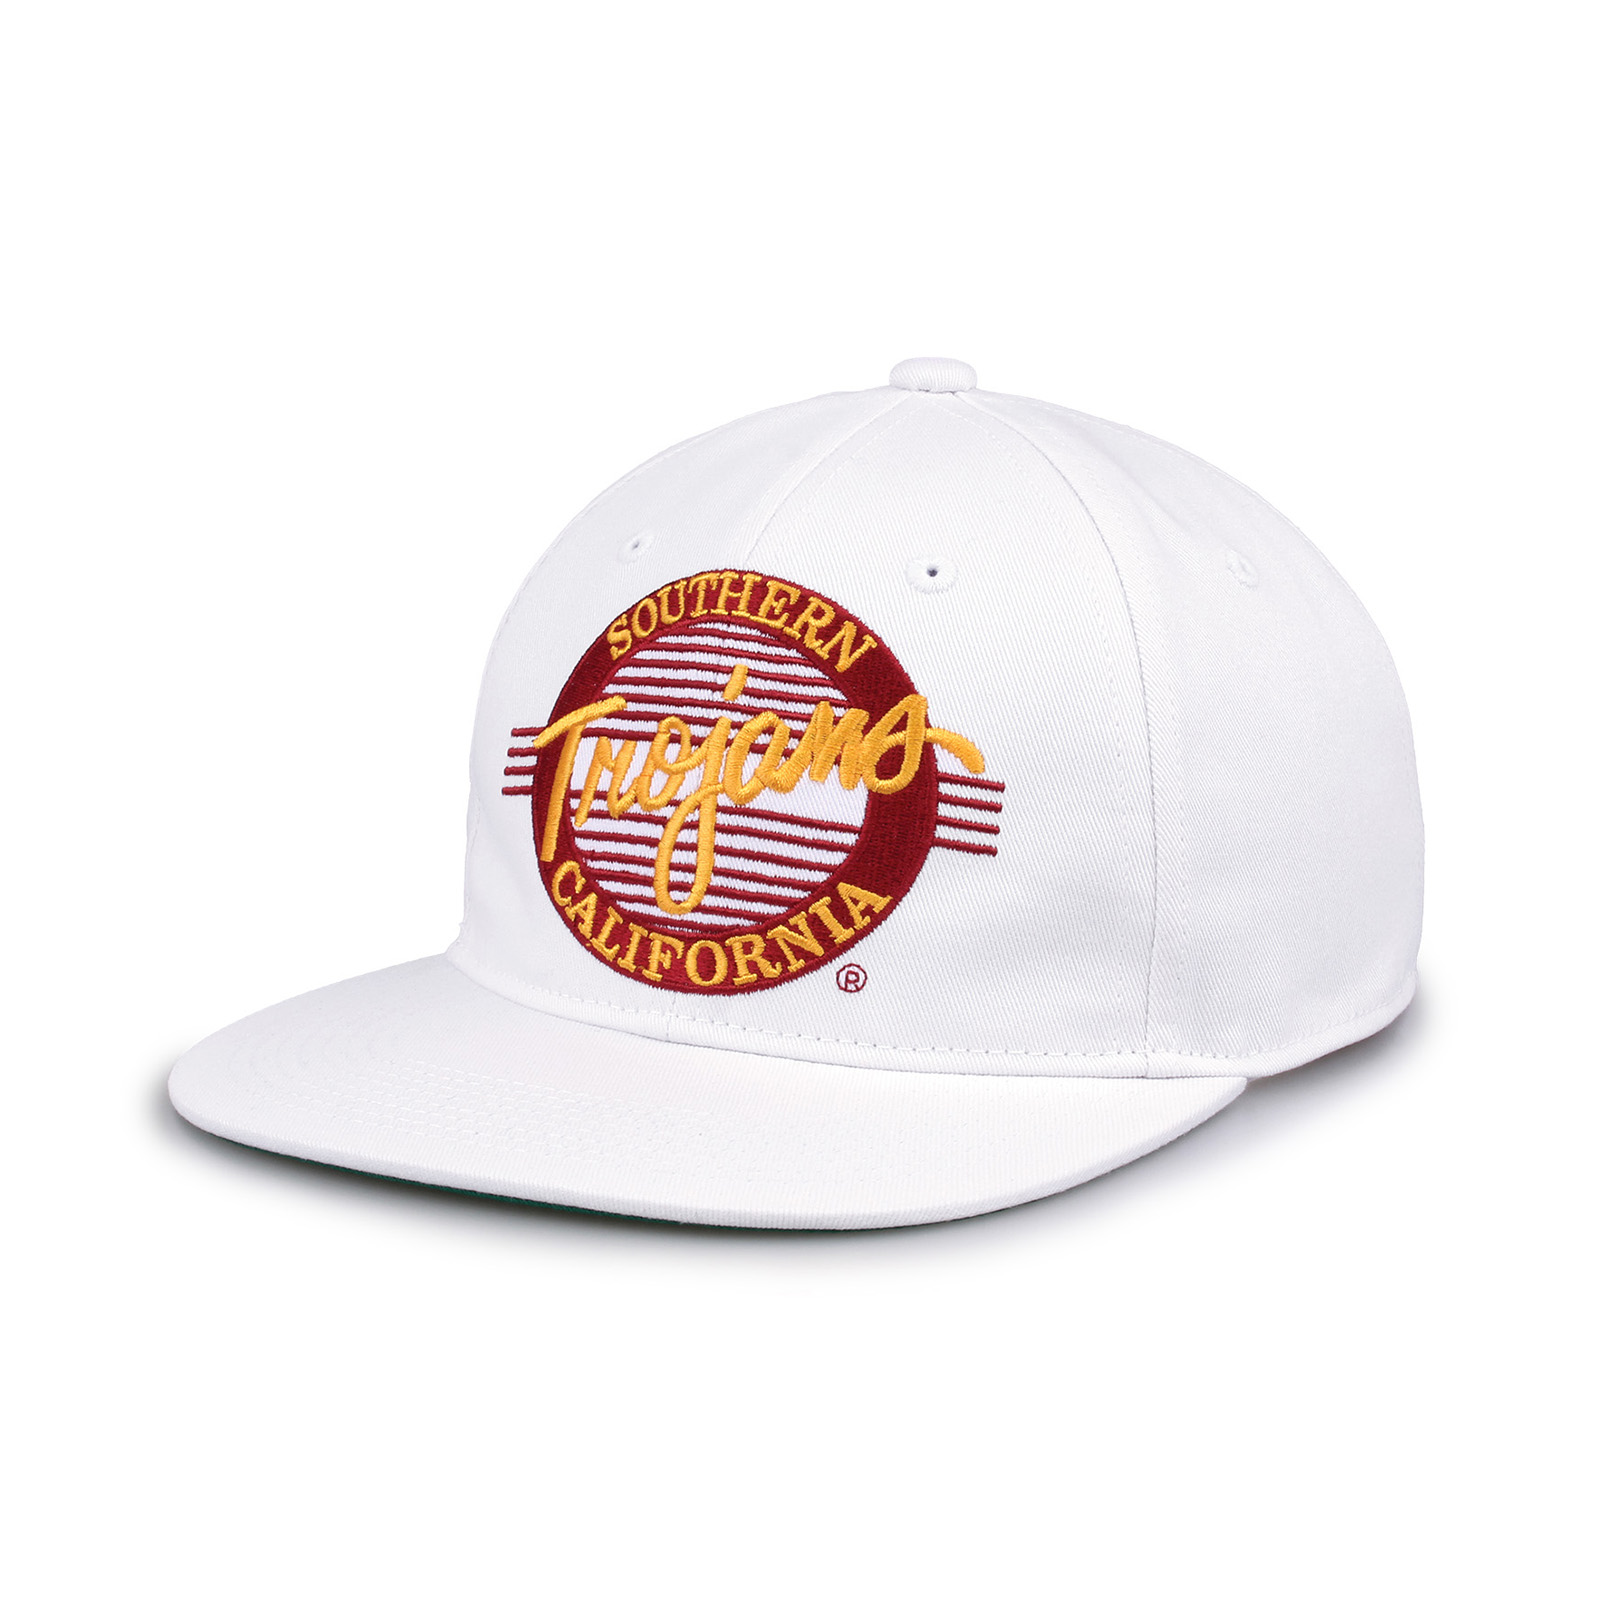 USC Retro Circle Design Snapback Hat White by The Game image01